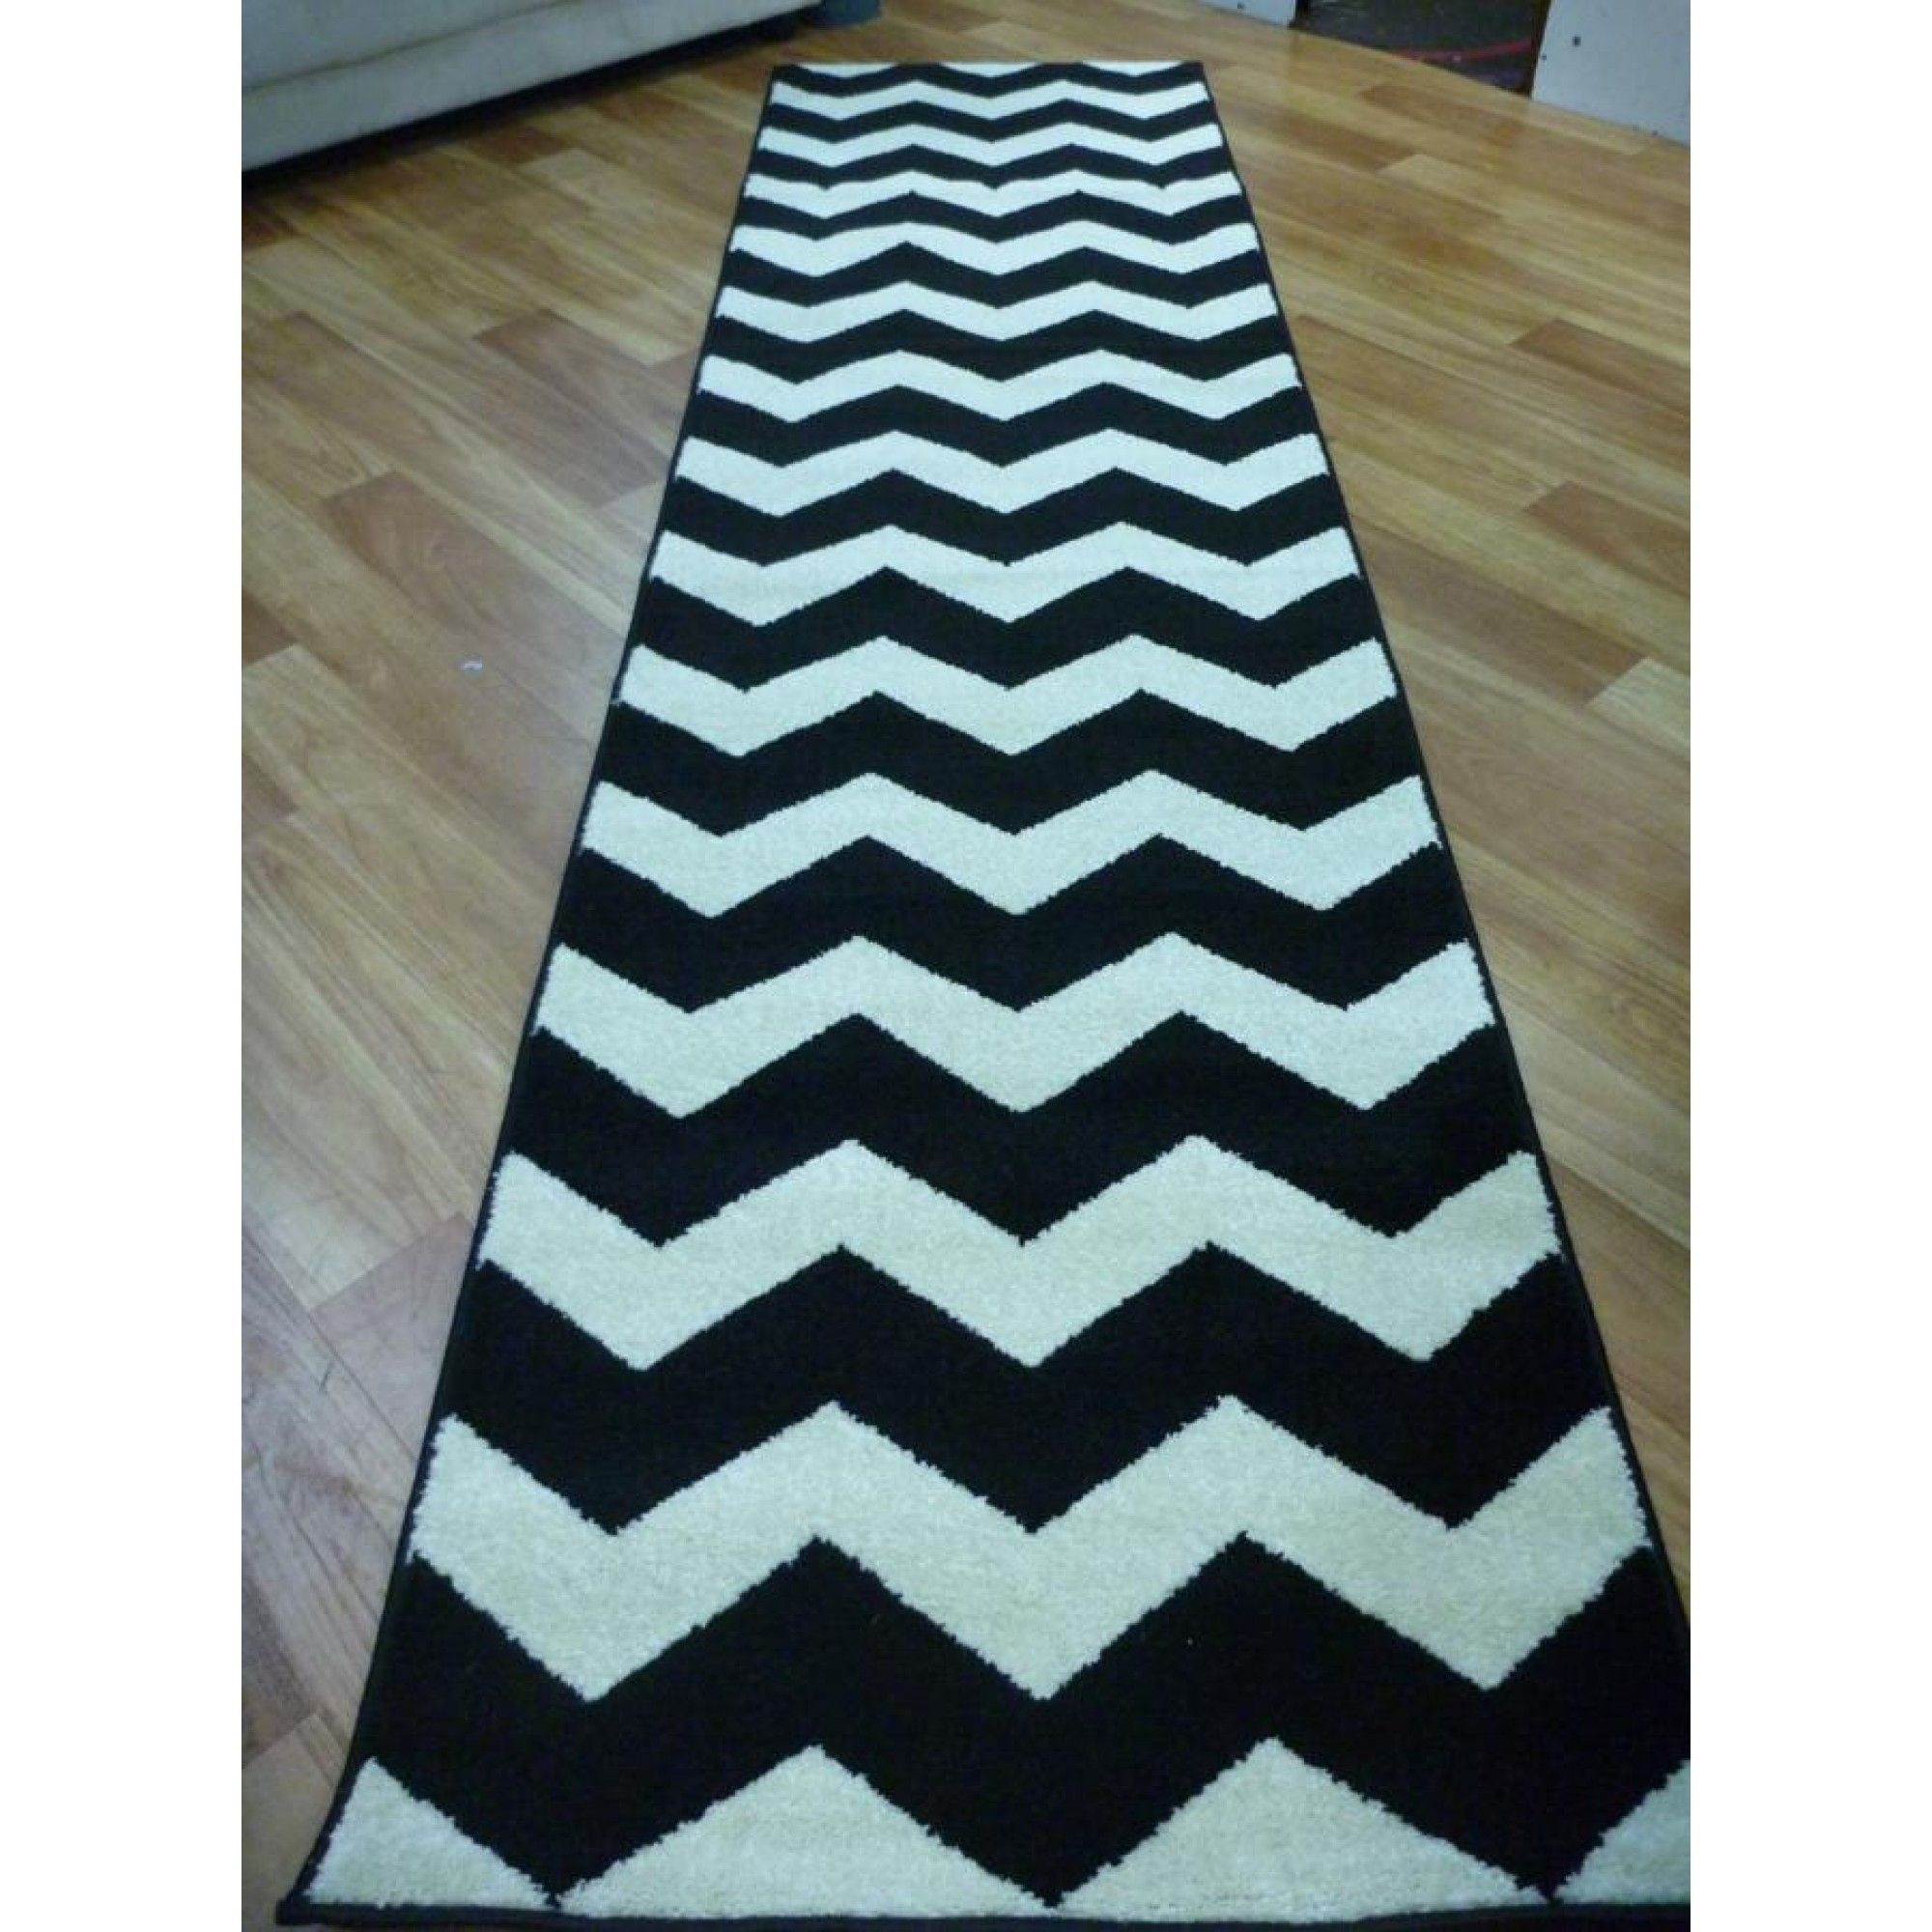 Chevron Modern Hallway Runners Free Shipping Australia Wide Kids Throughout Hall Runners And Rugs (View 19 of 20)